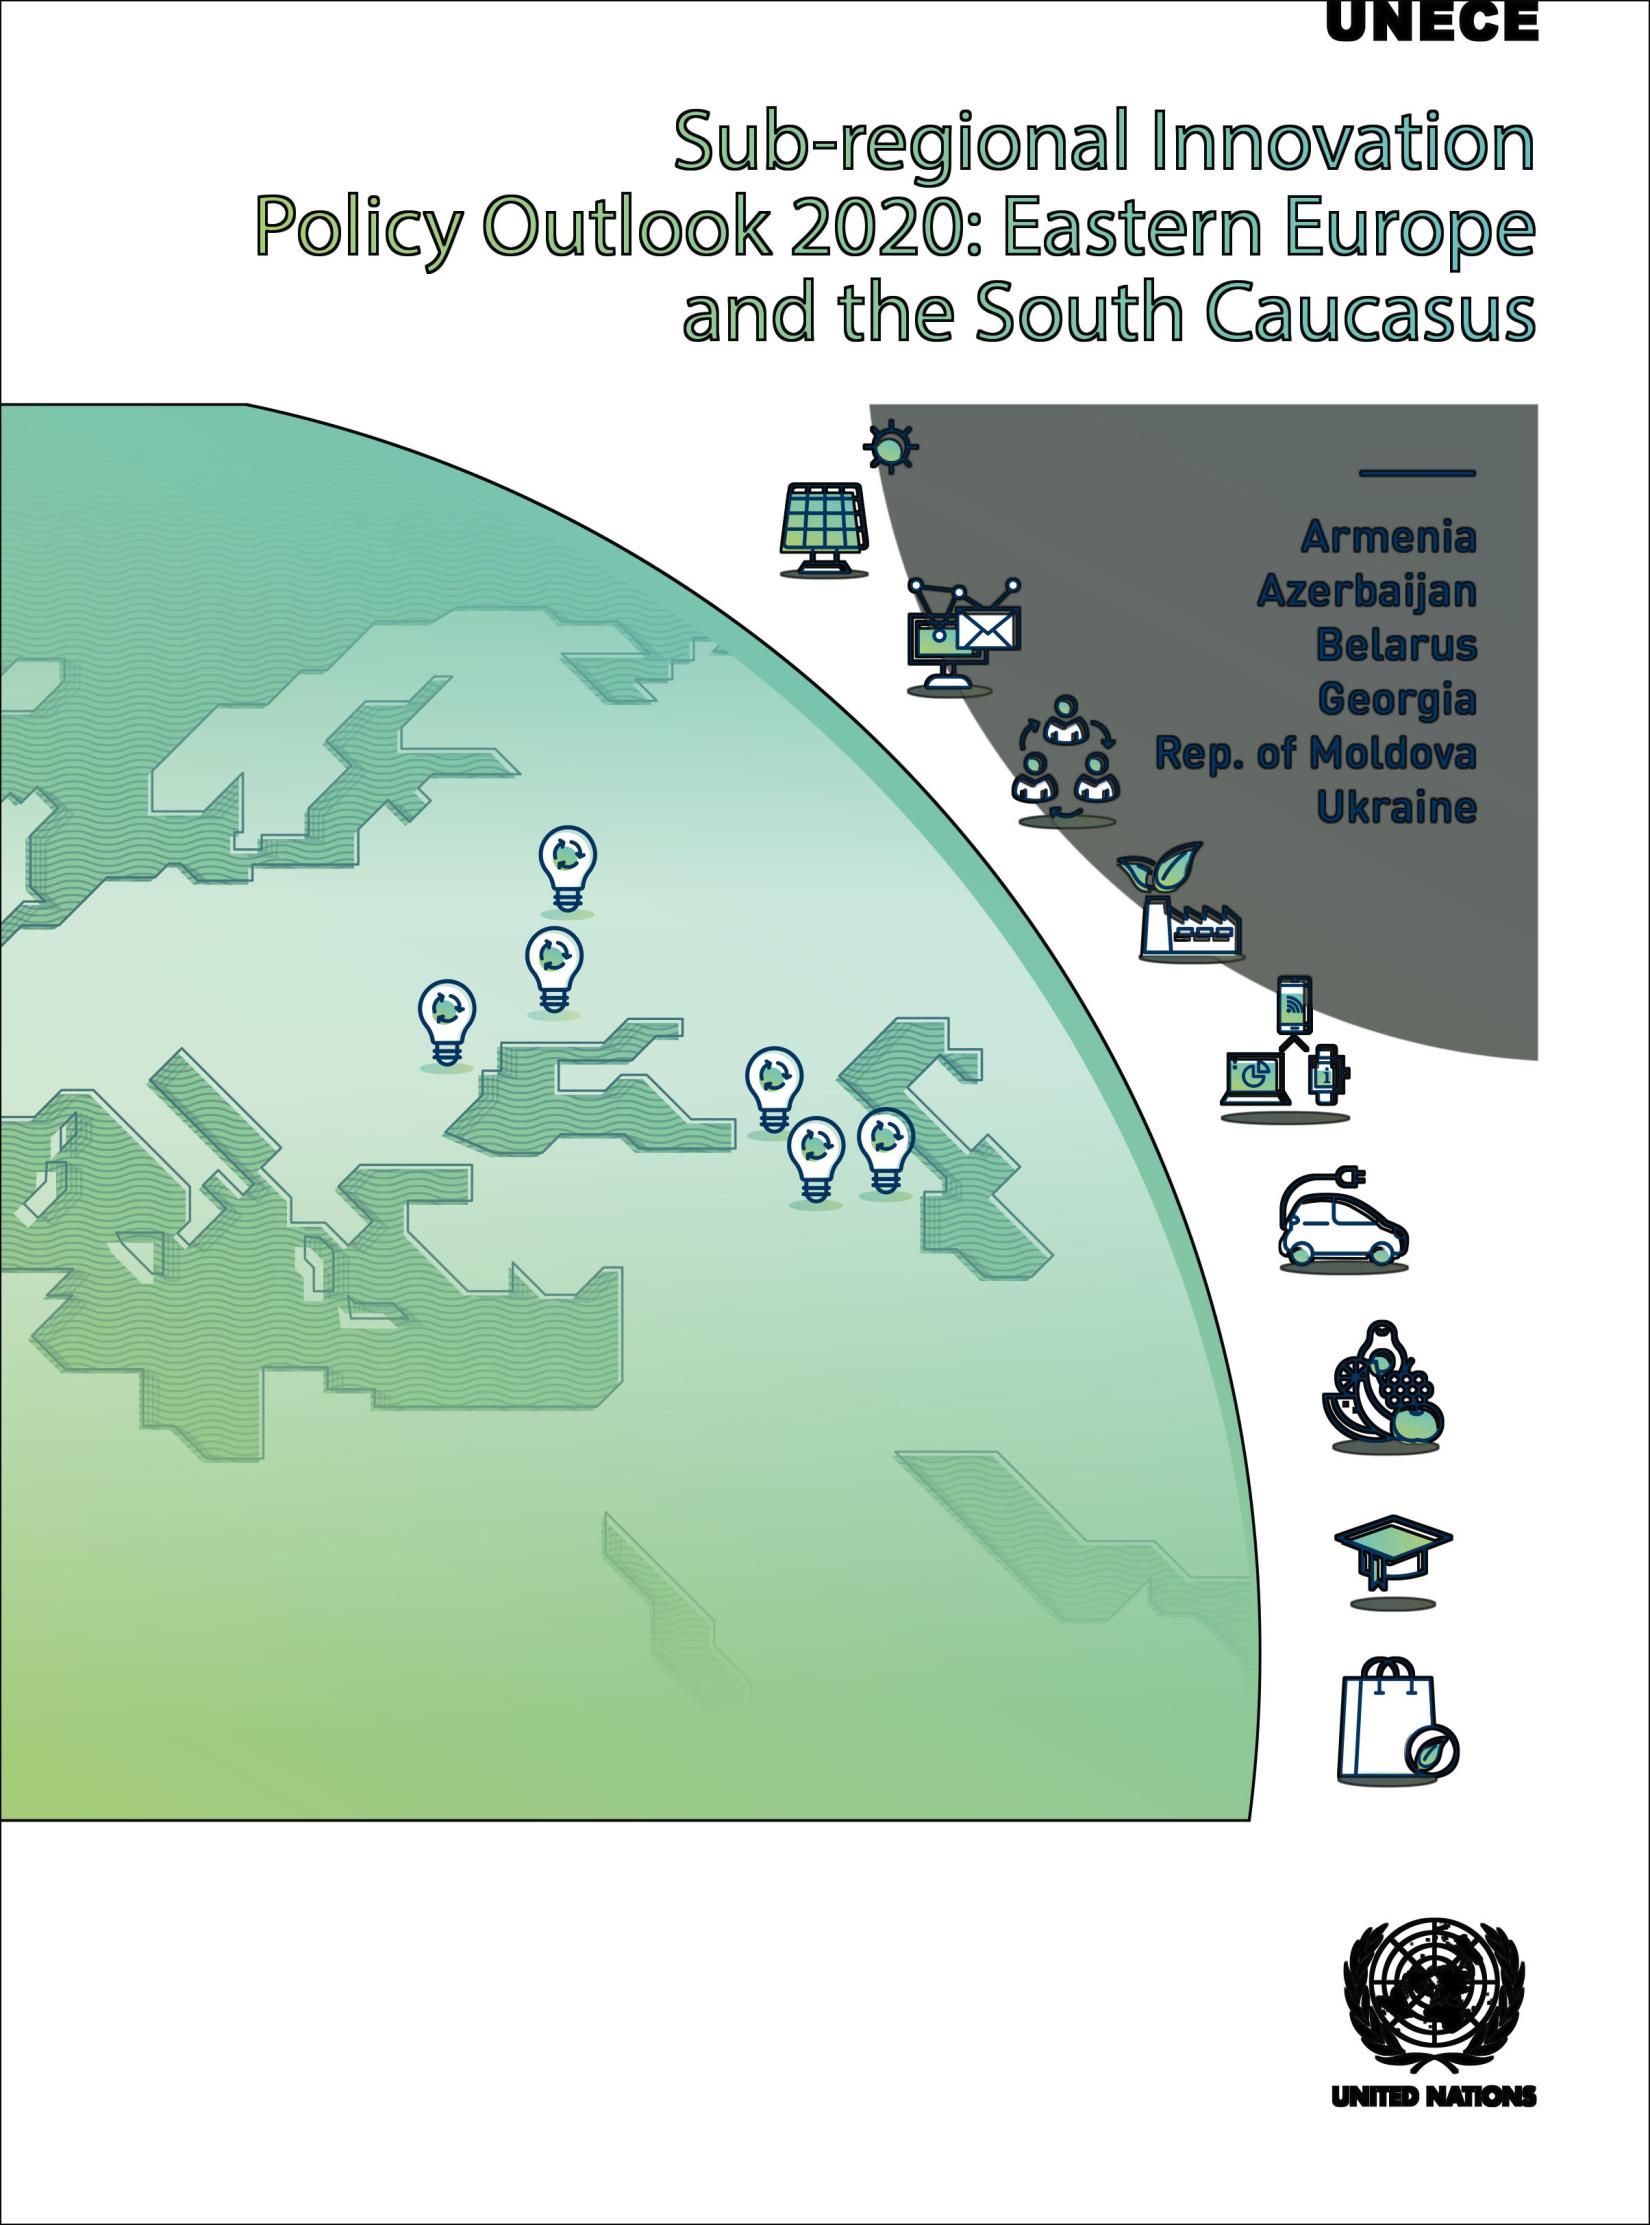 UNECE Sub-Regional Innovation Policy Outlook 2020: Easter Europe and the South Caucasus 